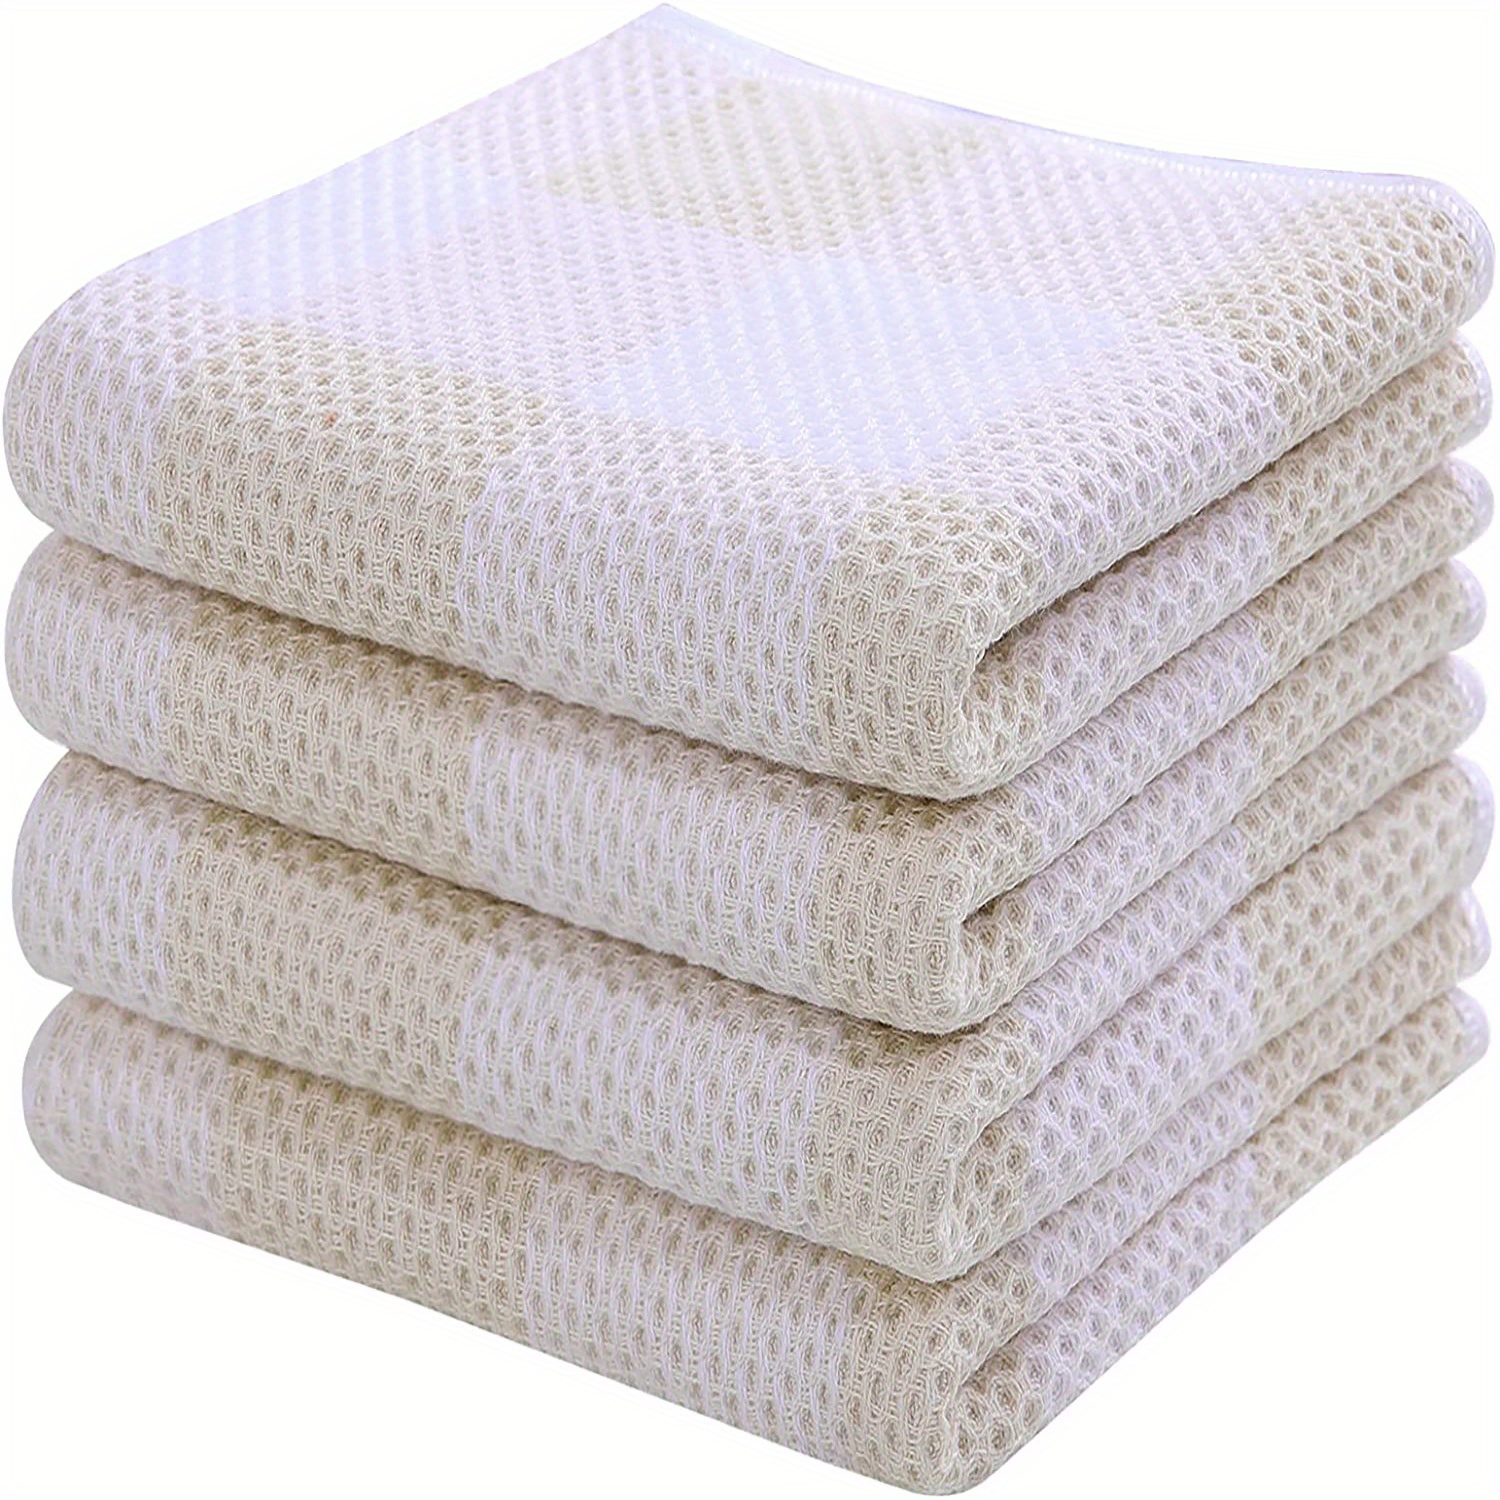 100% Cotton Waffle Weave Check Plaid Dish Cloths, 16-Pack Super Soft and  Absorbent Dish Rags, Dish Cloths for Washing Dishes, 12 x 12 InchesMothers